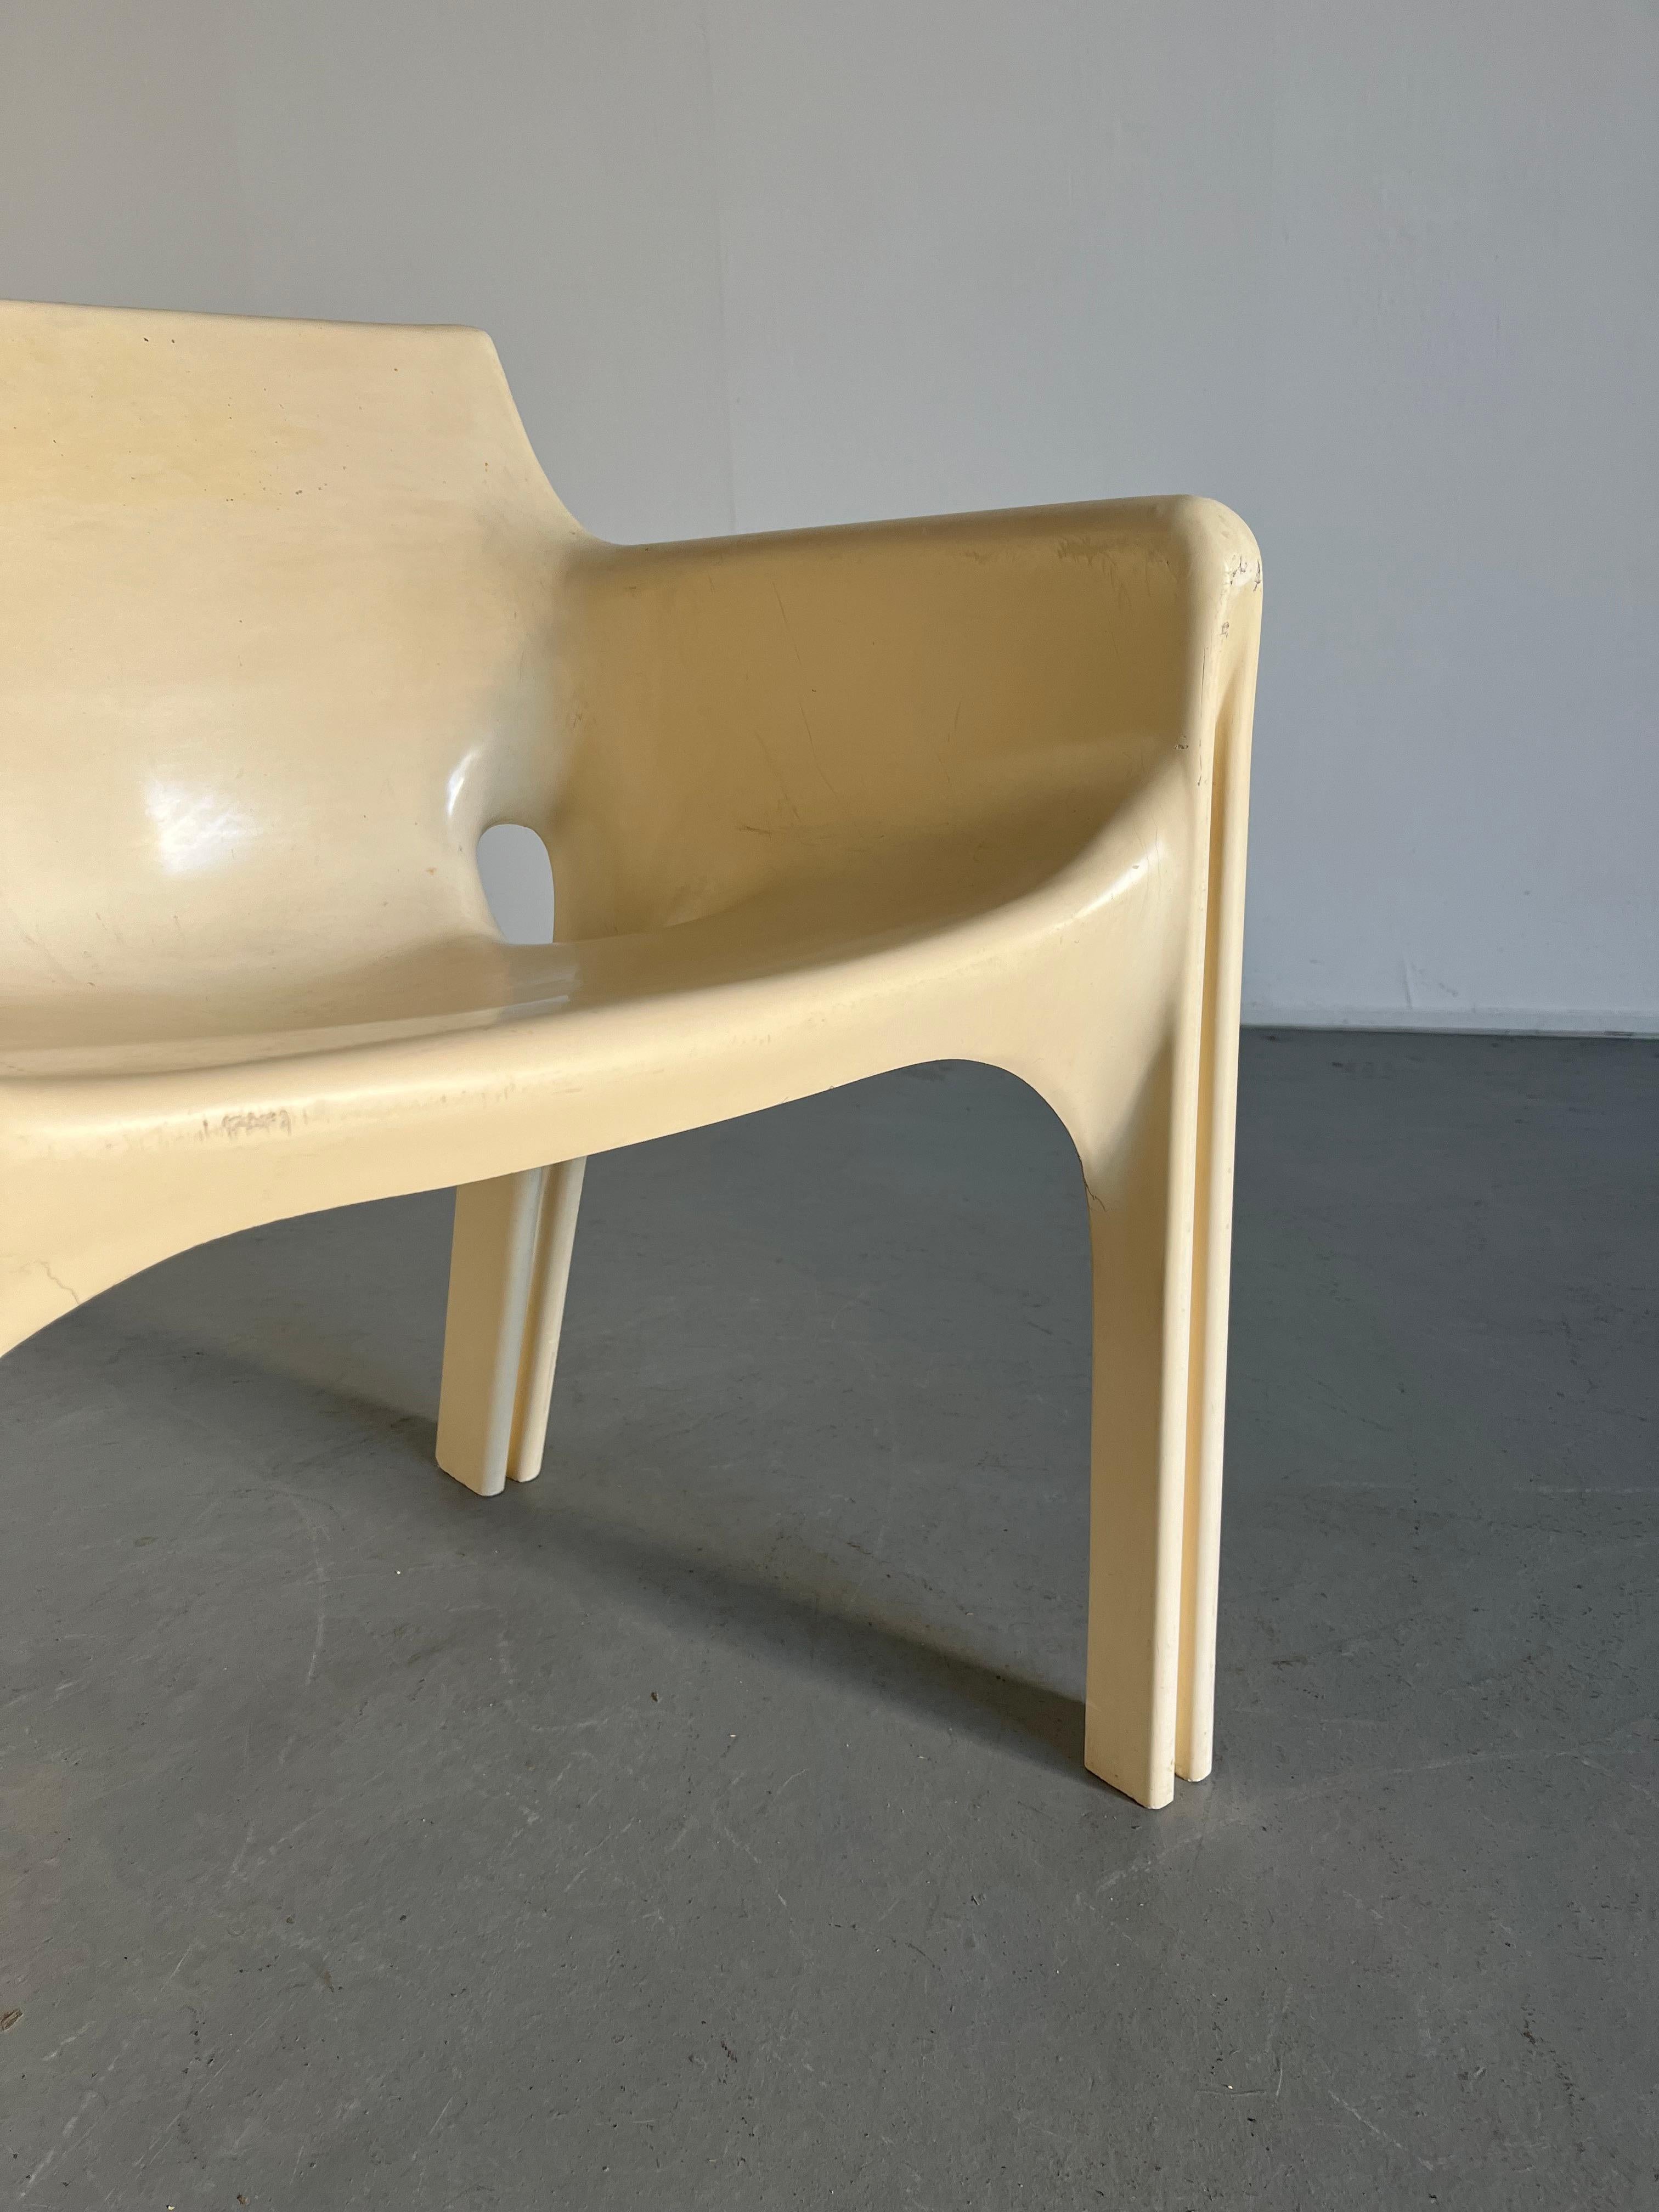 White 'Gaudi' Chair by Vico Magistretti for Artemide, Vintage Early Model, 1970s For Sale 1